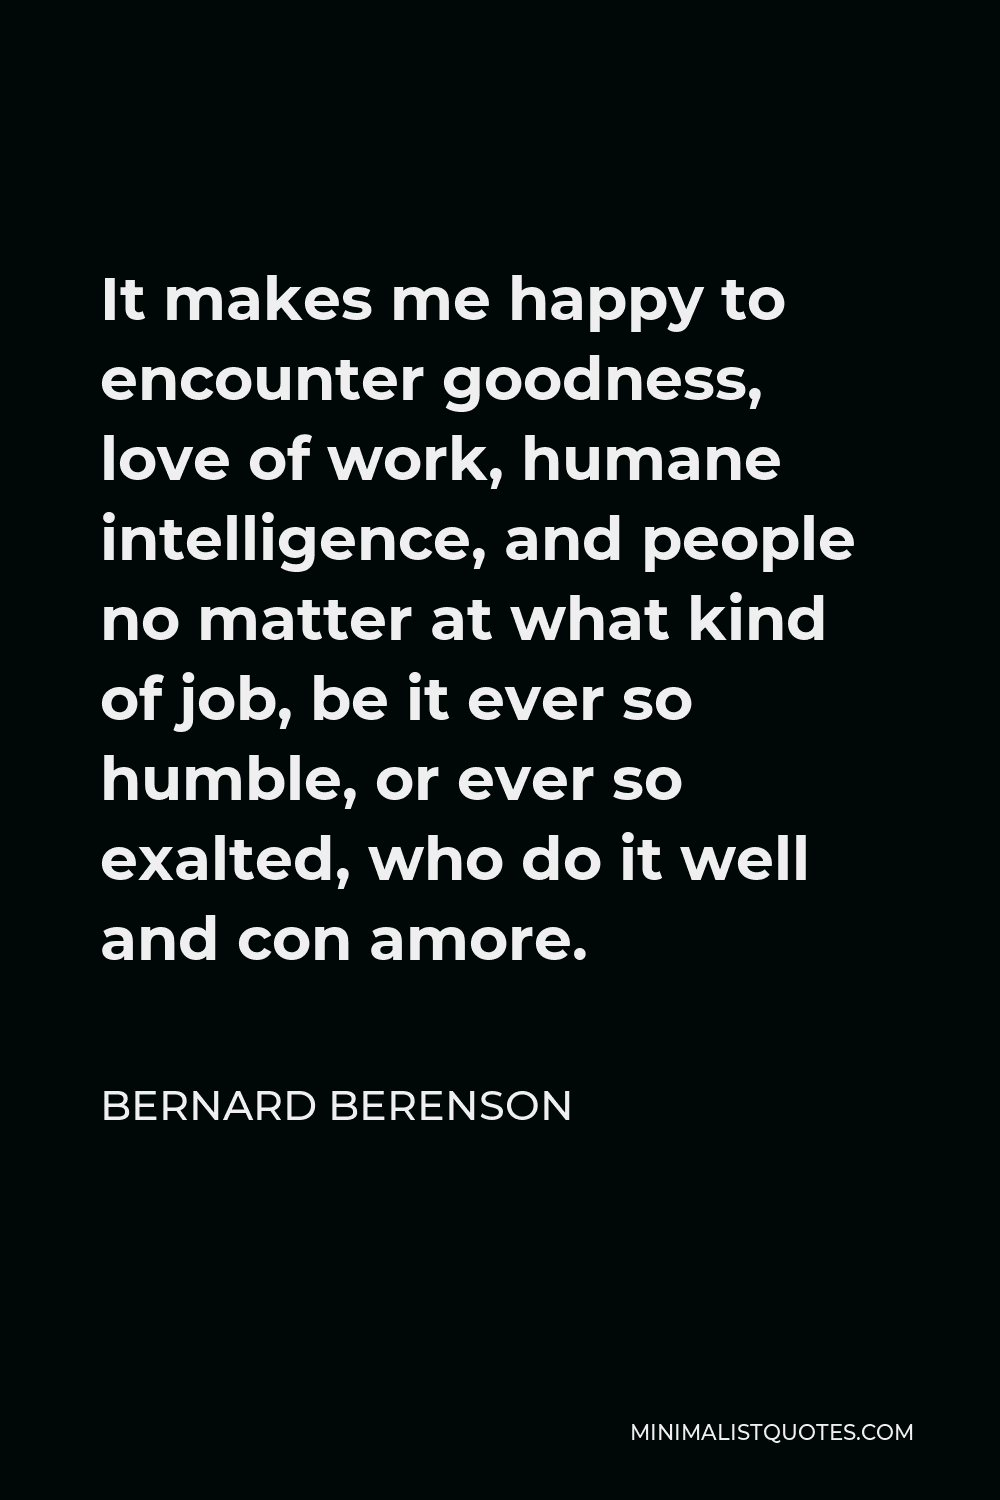 Bernard Berenson Quote - It makes me happy to encounter goodness, love of work, humane intelligence, and people no matter at what kind of job, be it ever so humble, or ever so exalted, who do it well and con amore.